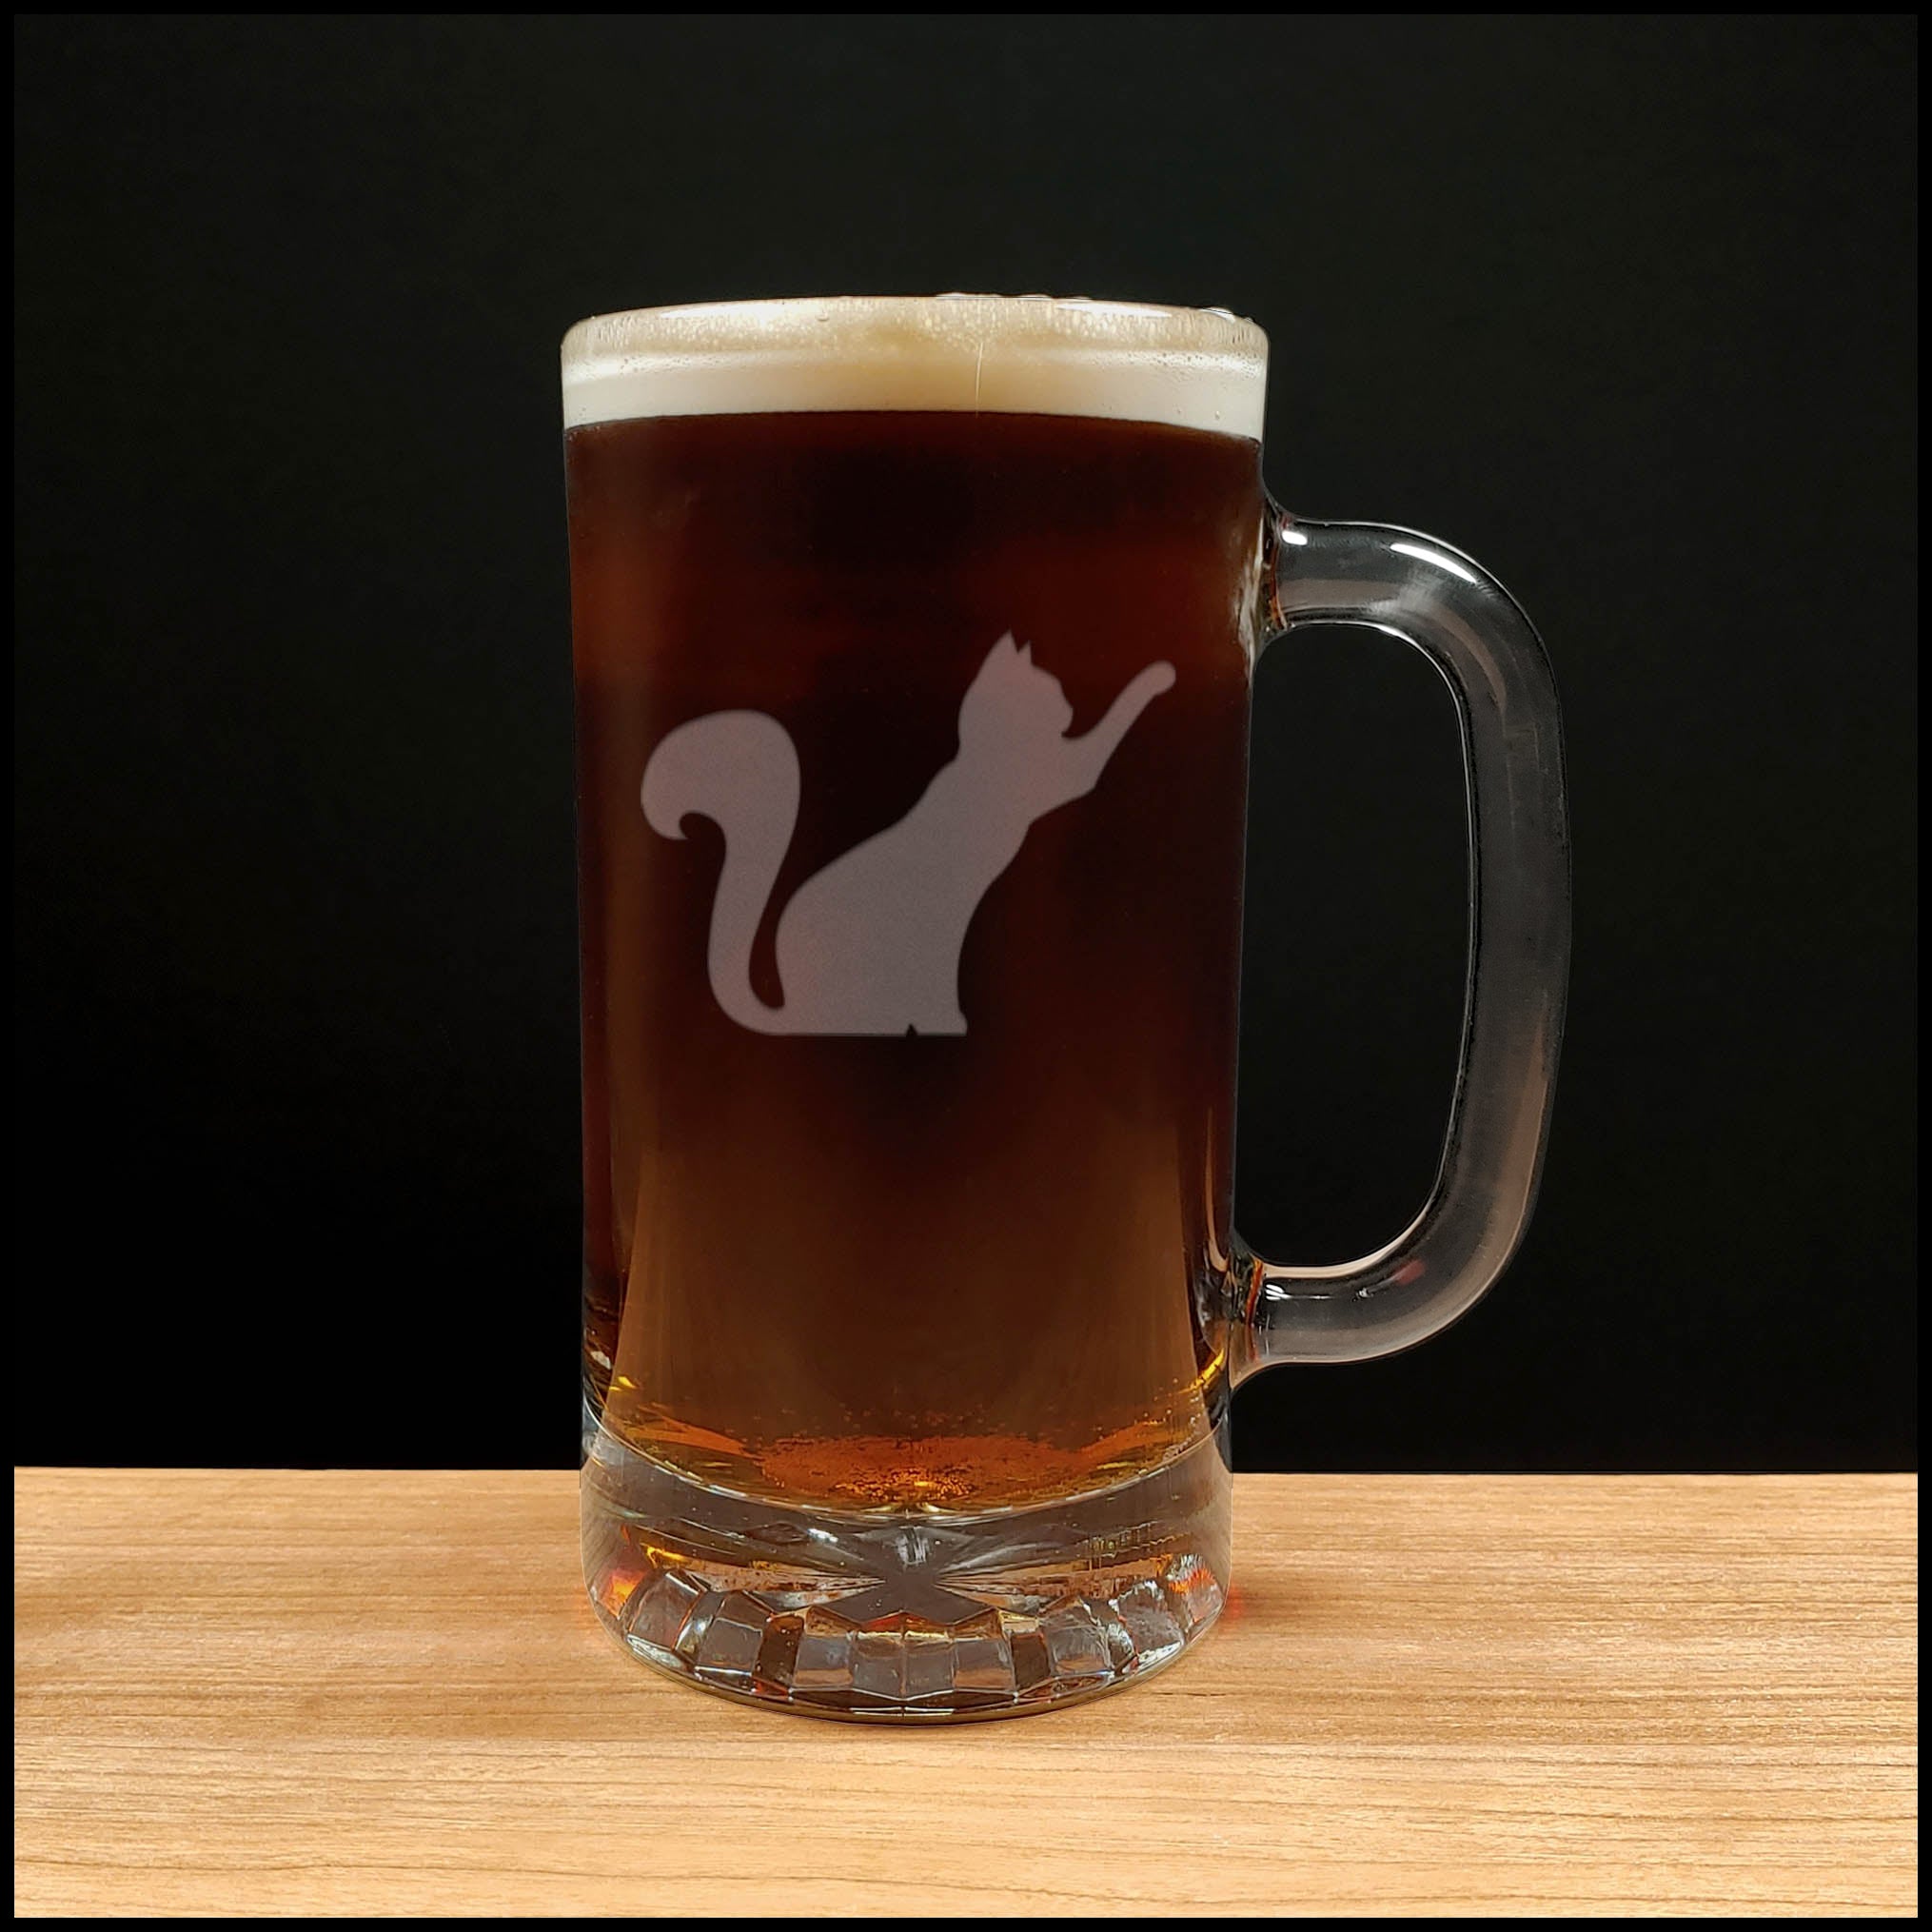 Playing Cat Beer Mug with Dark Beer - Copyright Hues in Glass